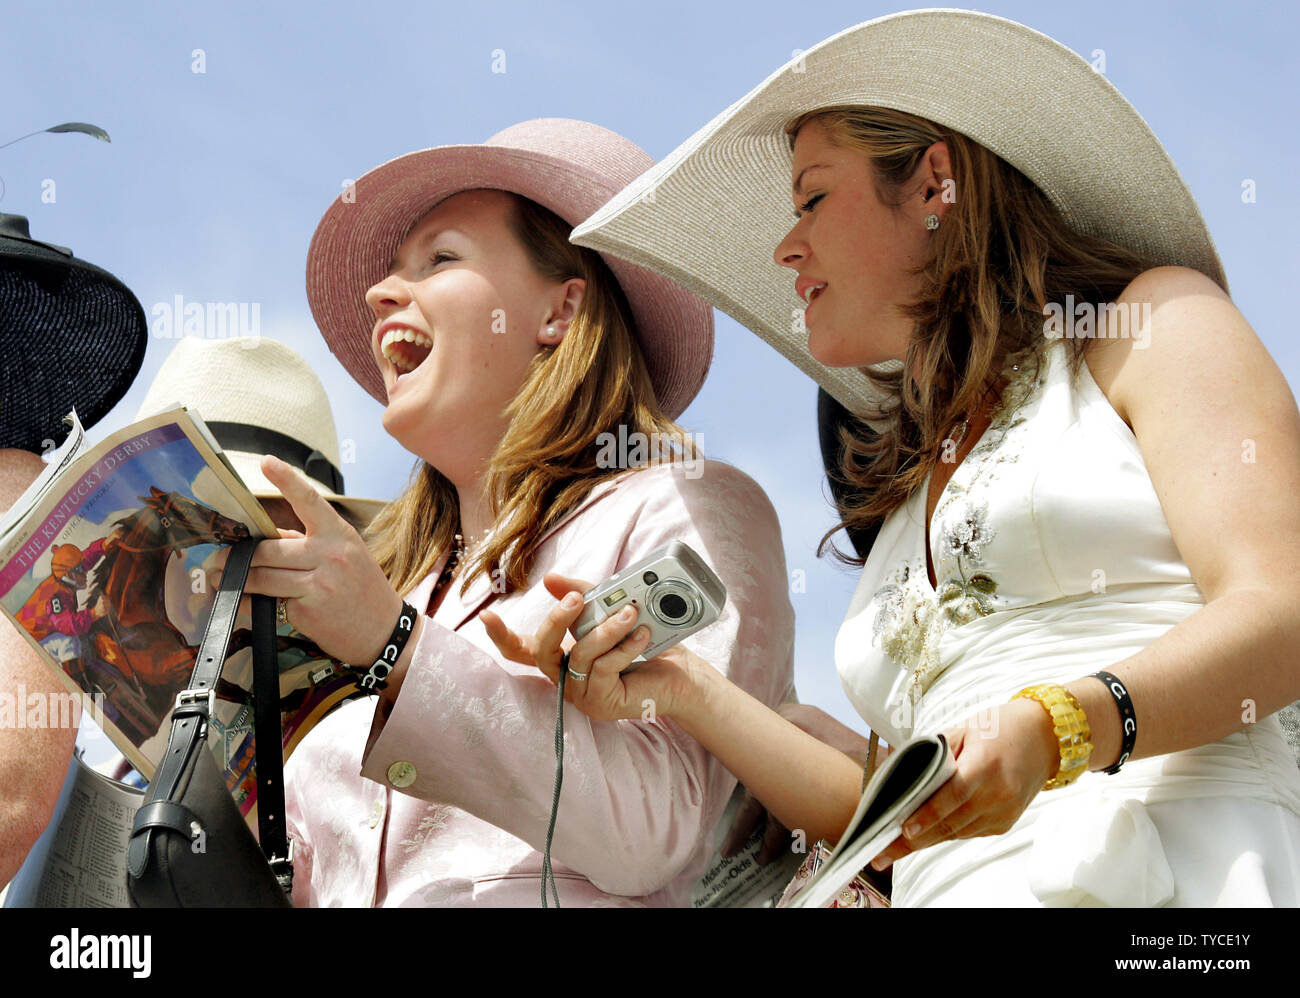 Fans watch celebraties walks throught the paddock area shortly before the 132nd running of the Kentucky Derby Saturday, May 6, 2006 in Louisville, KY. (UPI Photo/Frank Polich) Stock Photo